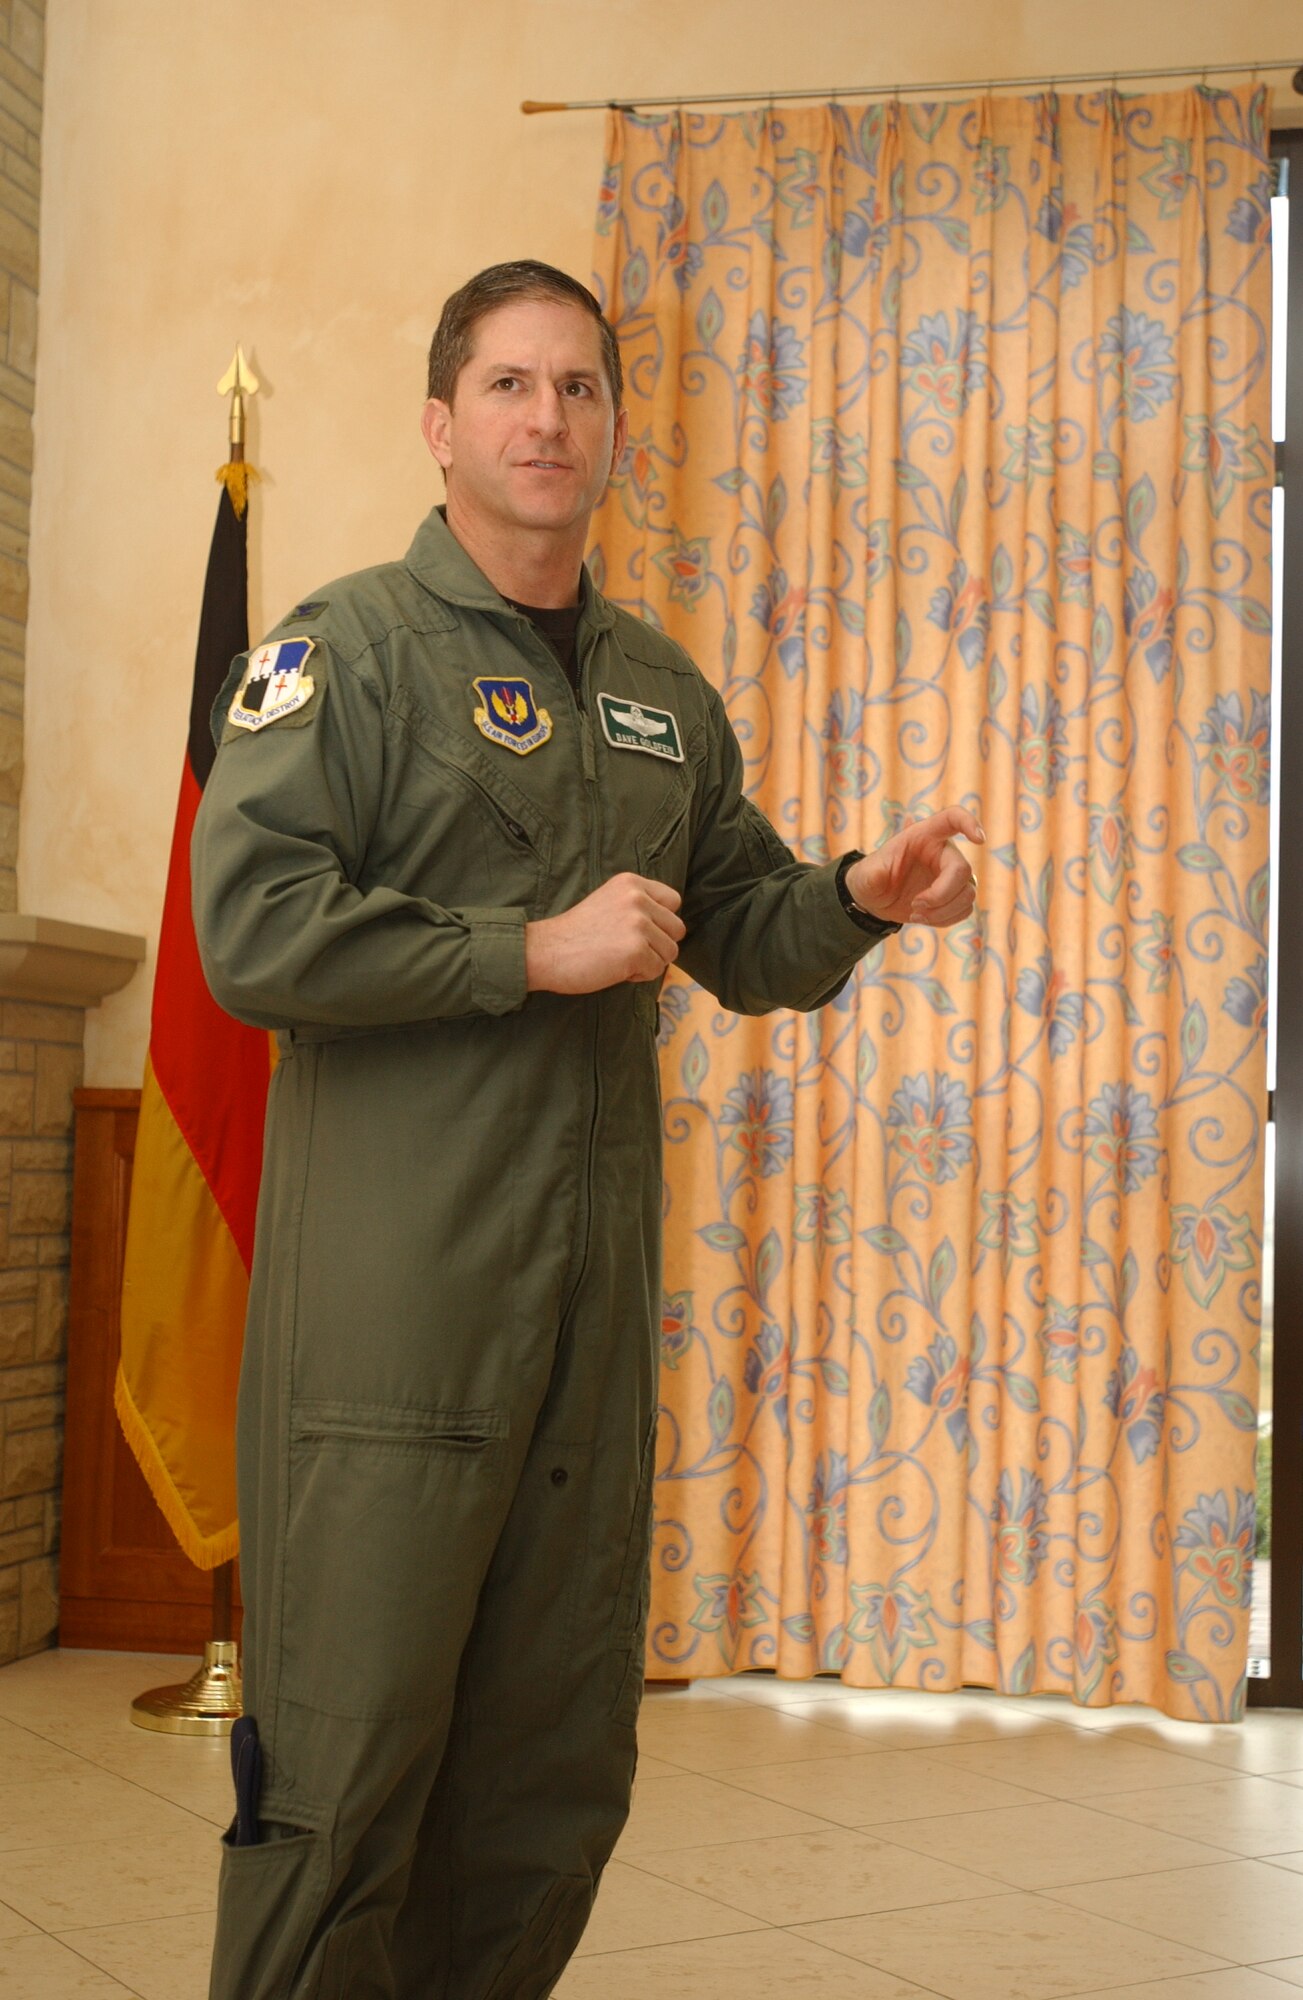 Col. David Goldfein, 52nd Fighter Wing commander, speaks in this March 7, 2006, photo on Spangdahlem Air Base, Germany.  Defense Secretary Ash Carter announced April 26, 2016, that the president has nominated Air Force Vice Chief of Staff Gen. David L. Goldfein to be the 21st chief of staff of the Air Force, succeeding Gen. Mark A. Welsh III, who has served in the position since 2012. (U.S. Air Force photo)